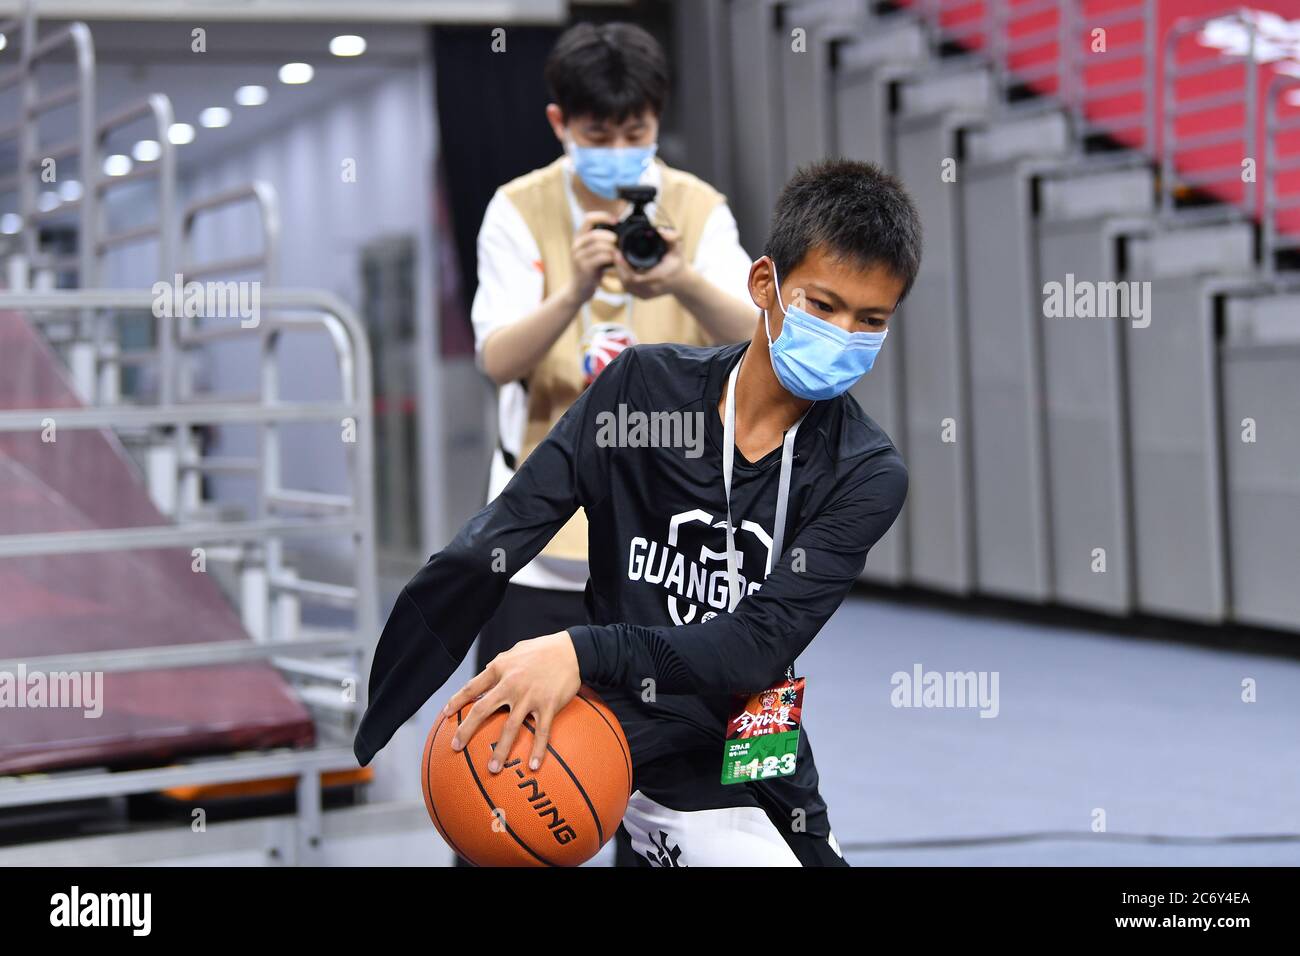 Zhang Jiacheng, an internet sensation, youth basketball player with one arm, practices basketball before a CBA game between Guangdong Southern Tigers Stock Photo